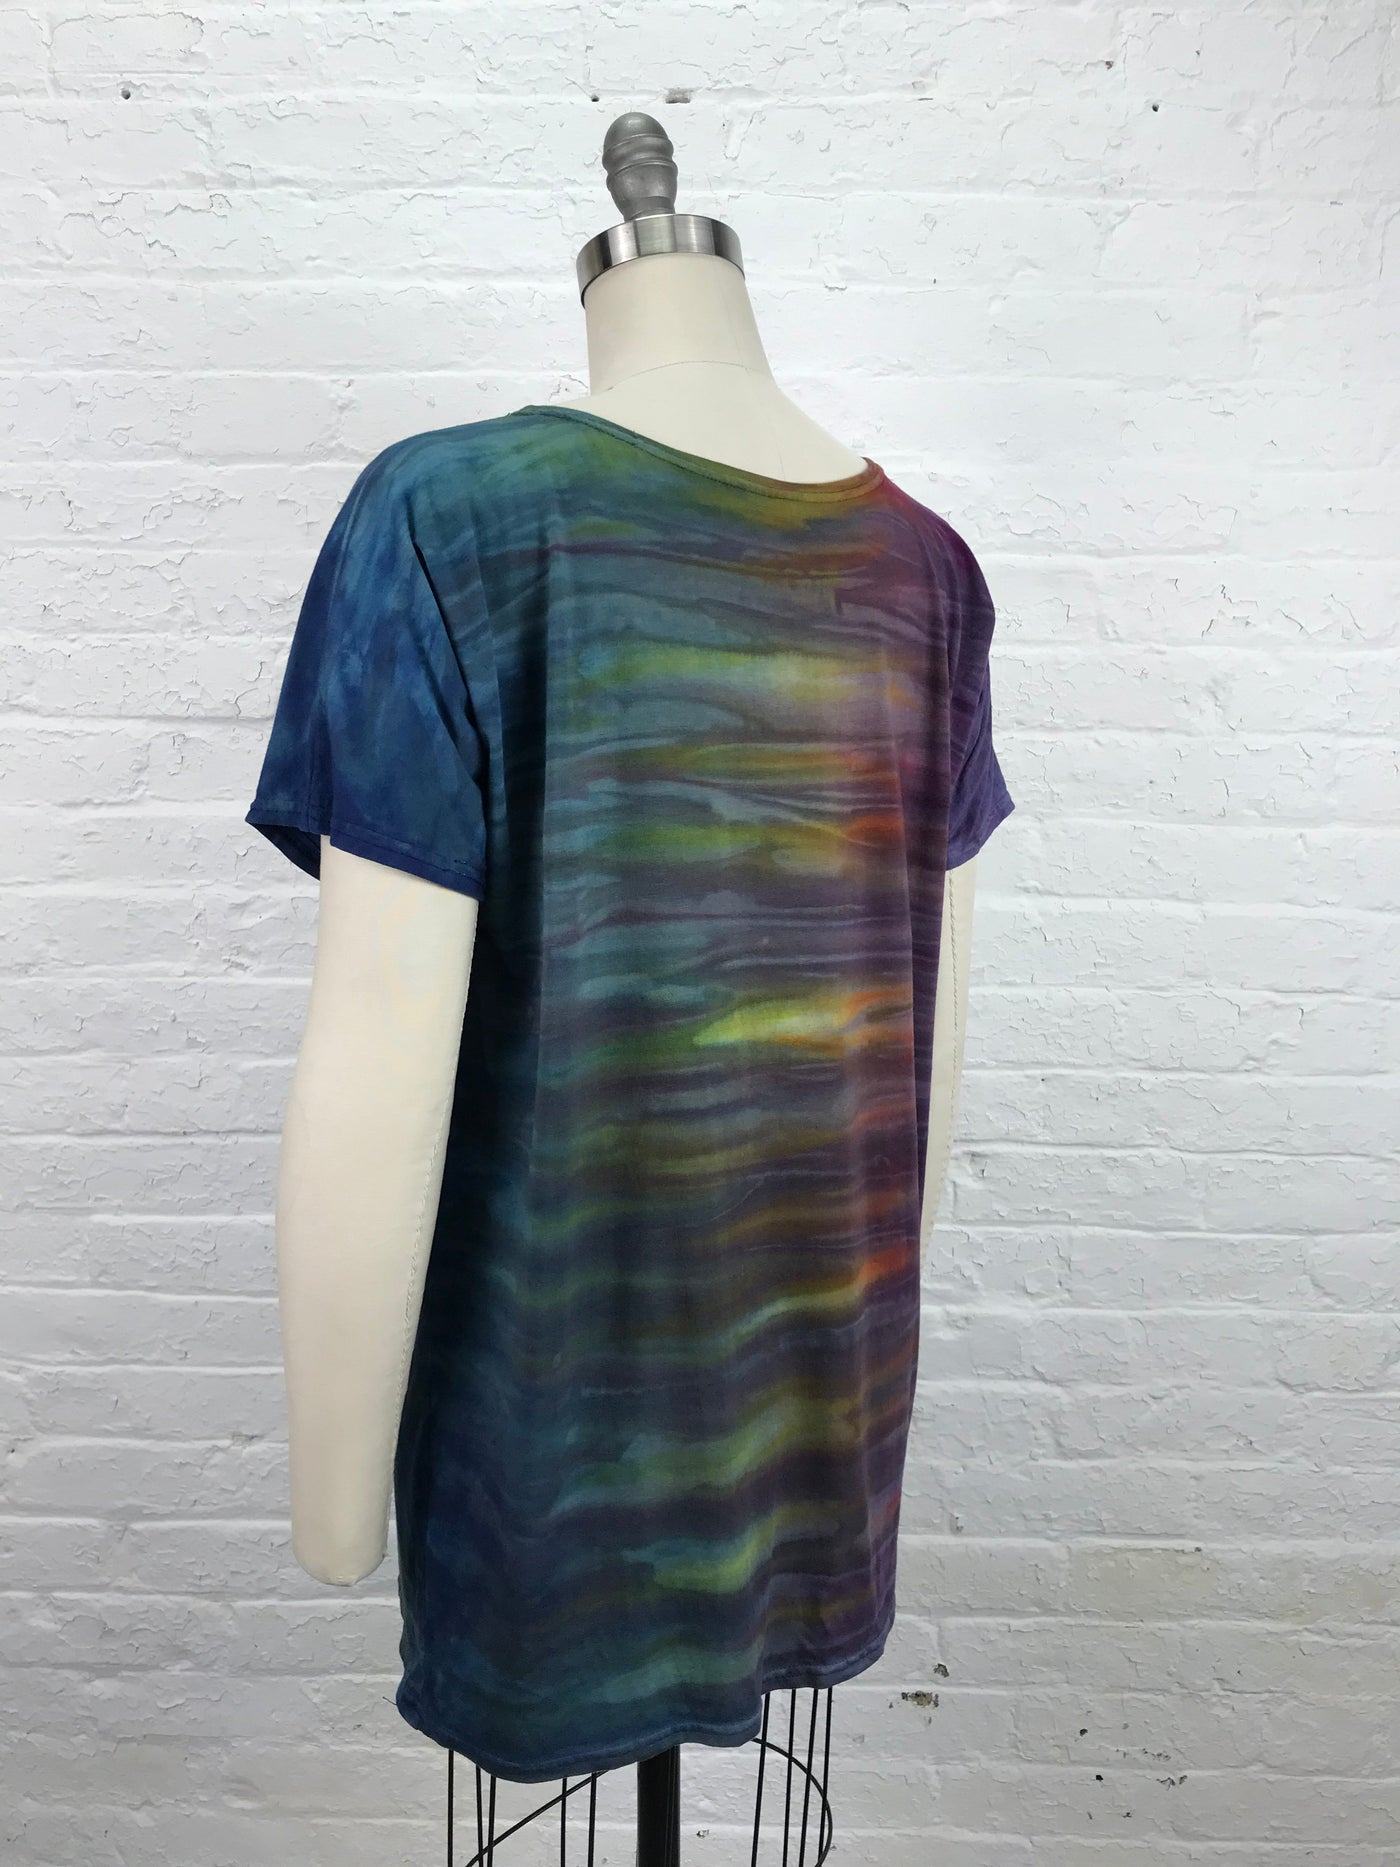 Astrid Mini in Spectro - a short sleeve, loose cut tunic in rainbow tones, made of cozy bamboo jersey which feels great on the skin - size S/M -back view